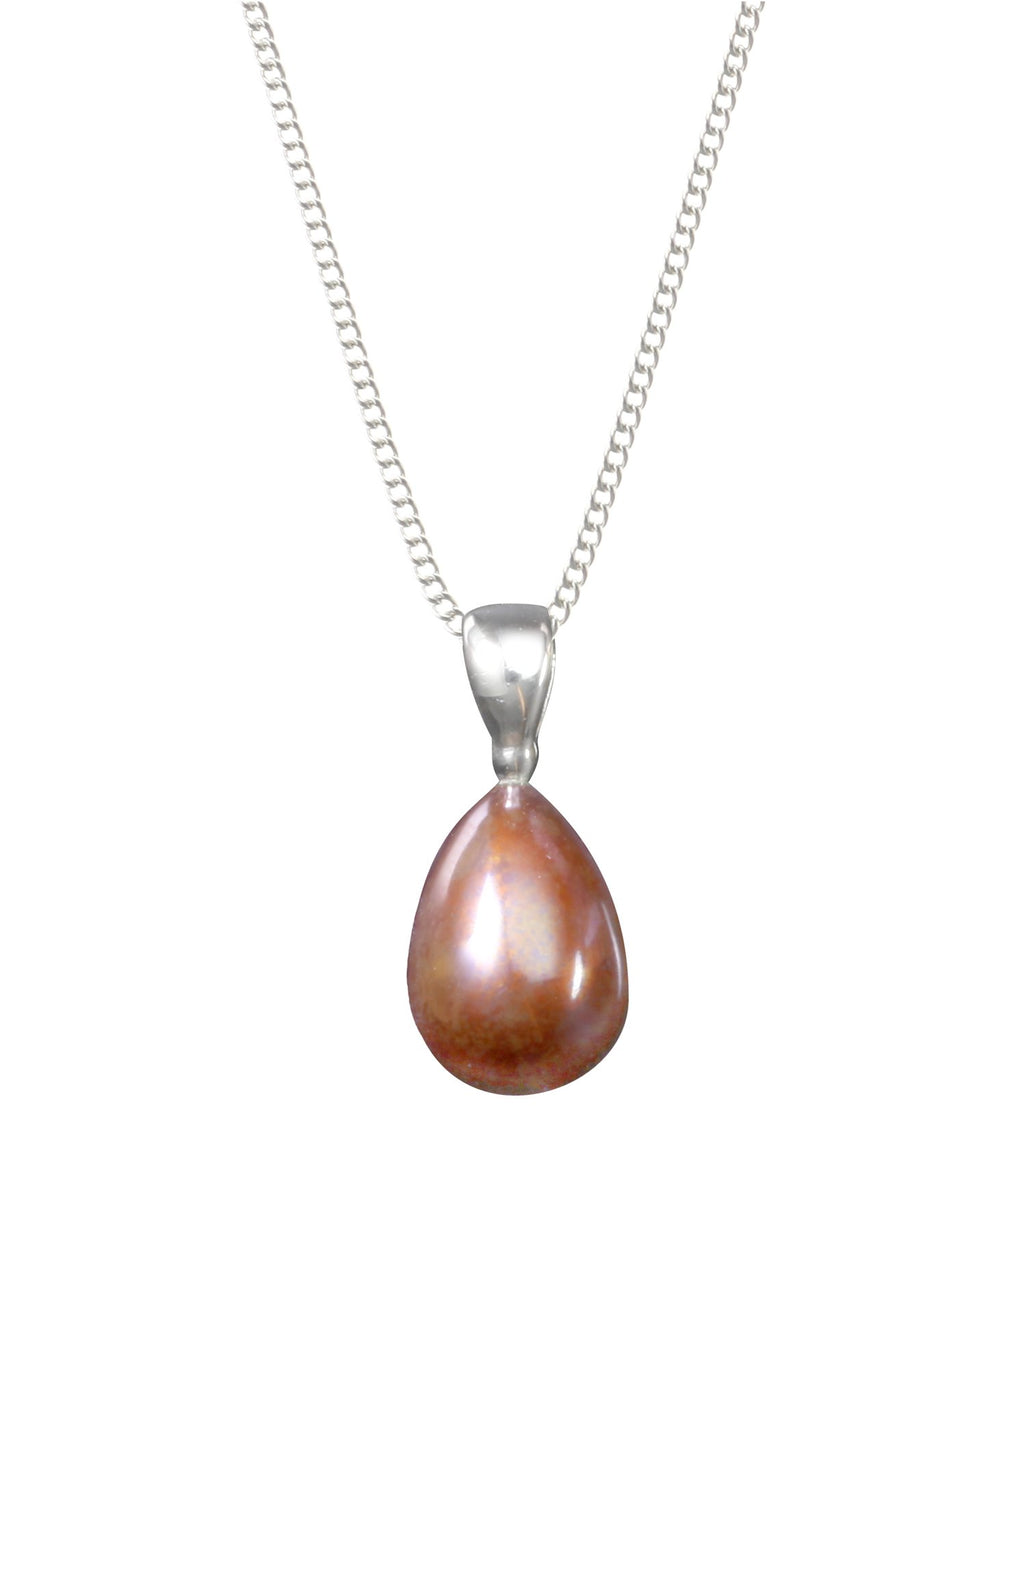 9ct White Gold Chocolate Pearl Pendant